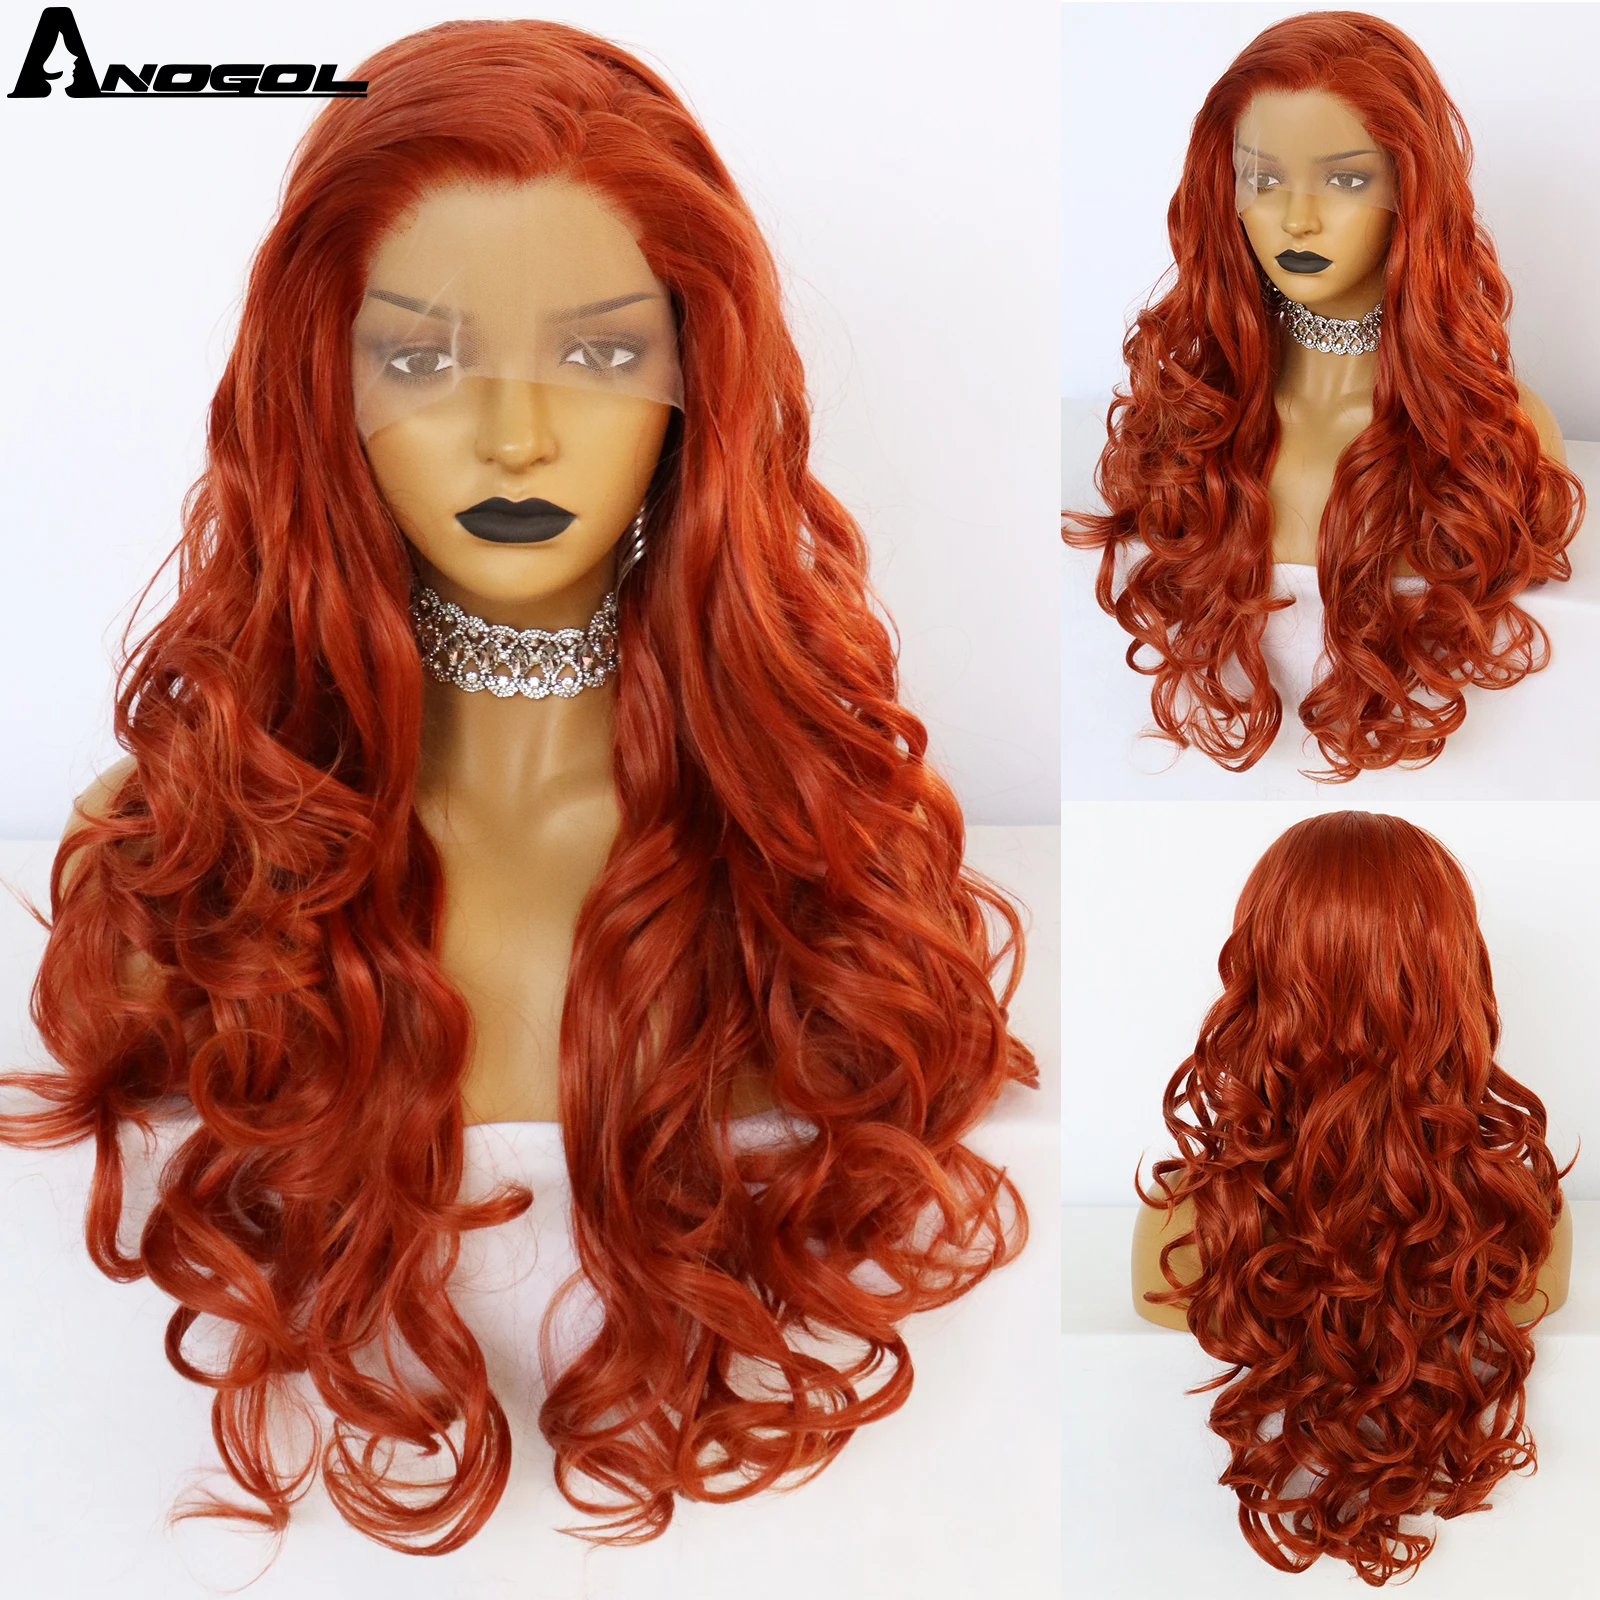 ANOGOL Synthetic 13x2.5 Lace Front Wig Free Part Orange Long Wavy Hair Wig Heat Resistant Fiber Wigs for Women